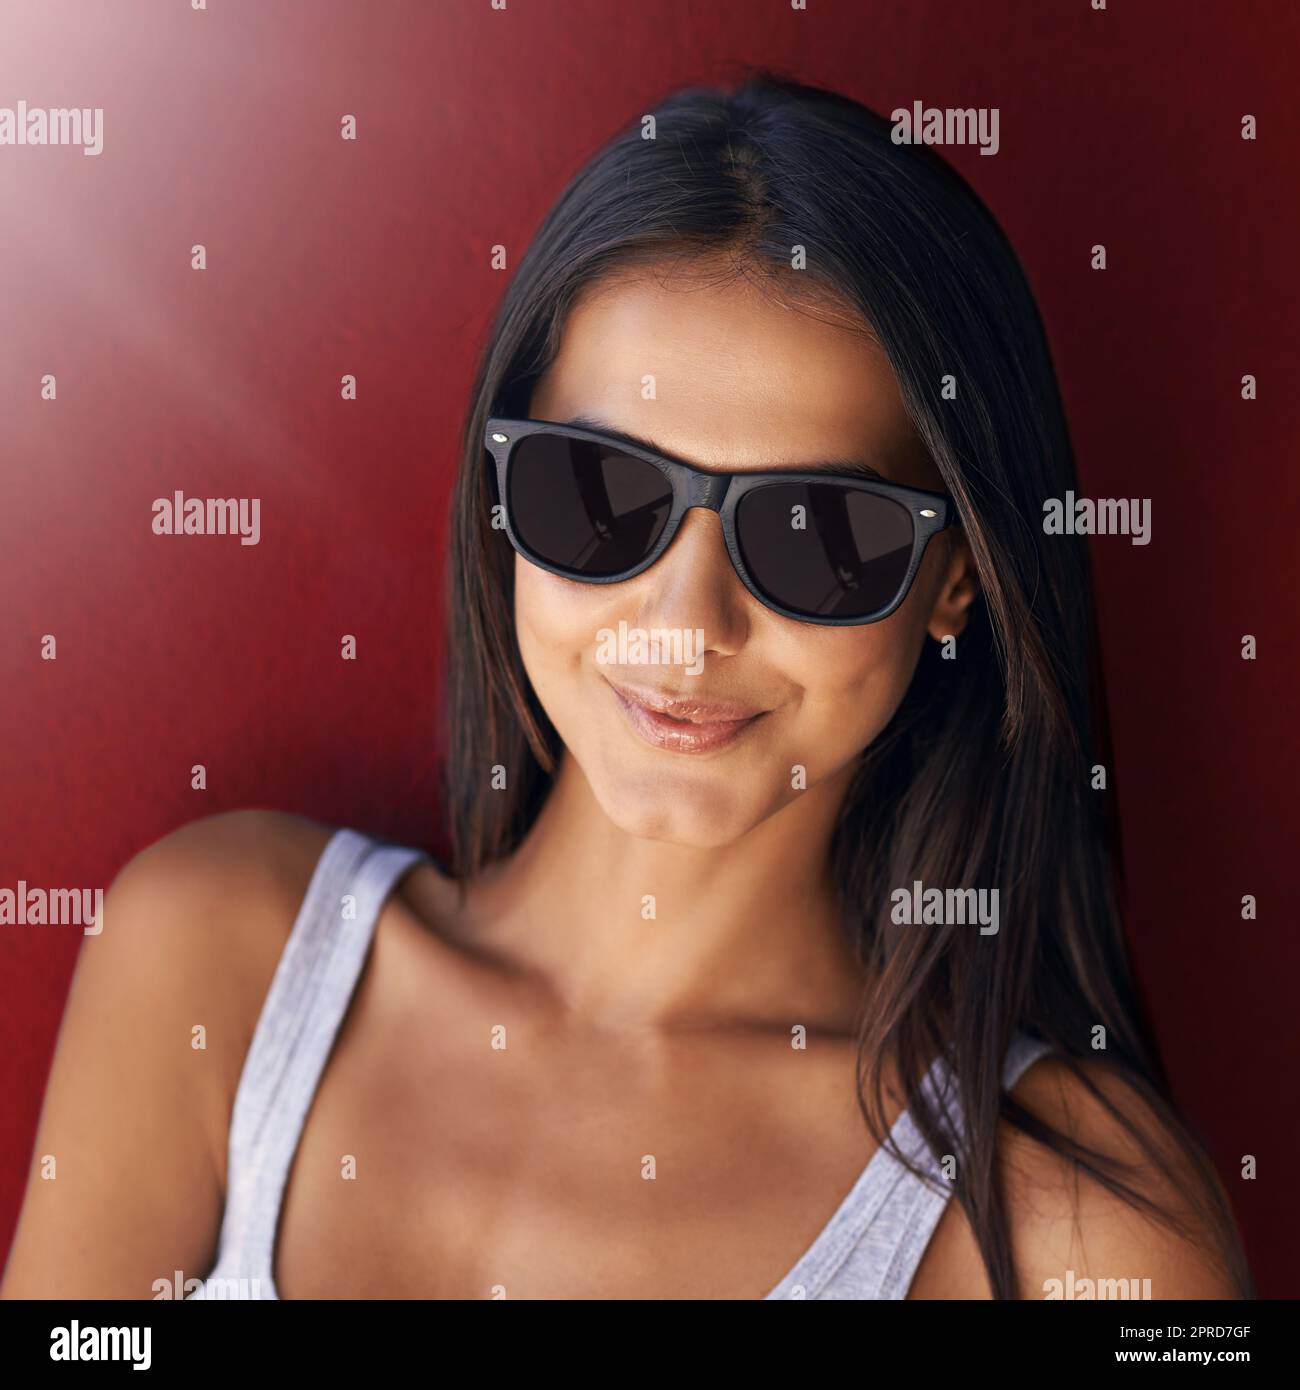 Cool, confident and beautiful woman wearing sunglasses and smiling against a red wall with lens flare. Face of a cheerful, stunning and happy female feeling good and showing a positive attitude Stock Photo